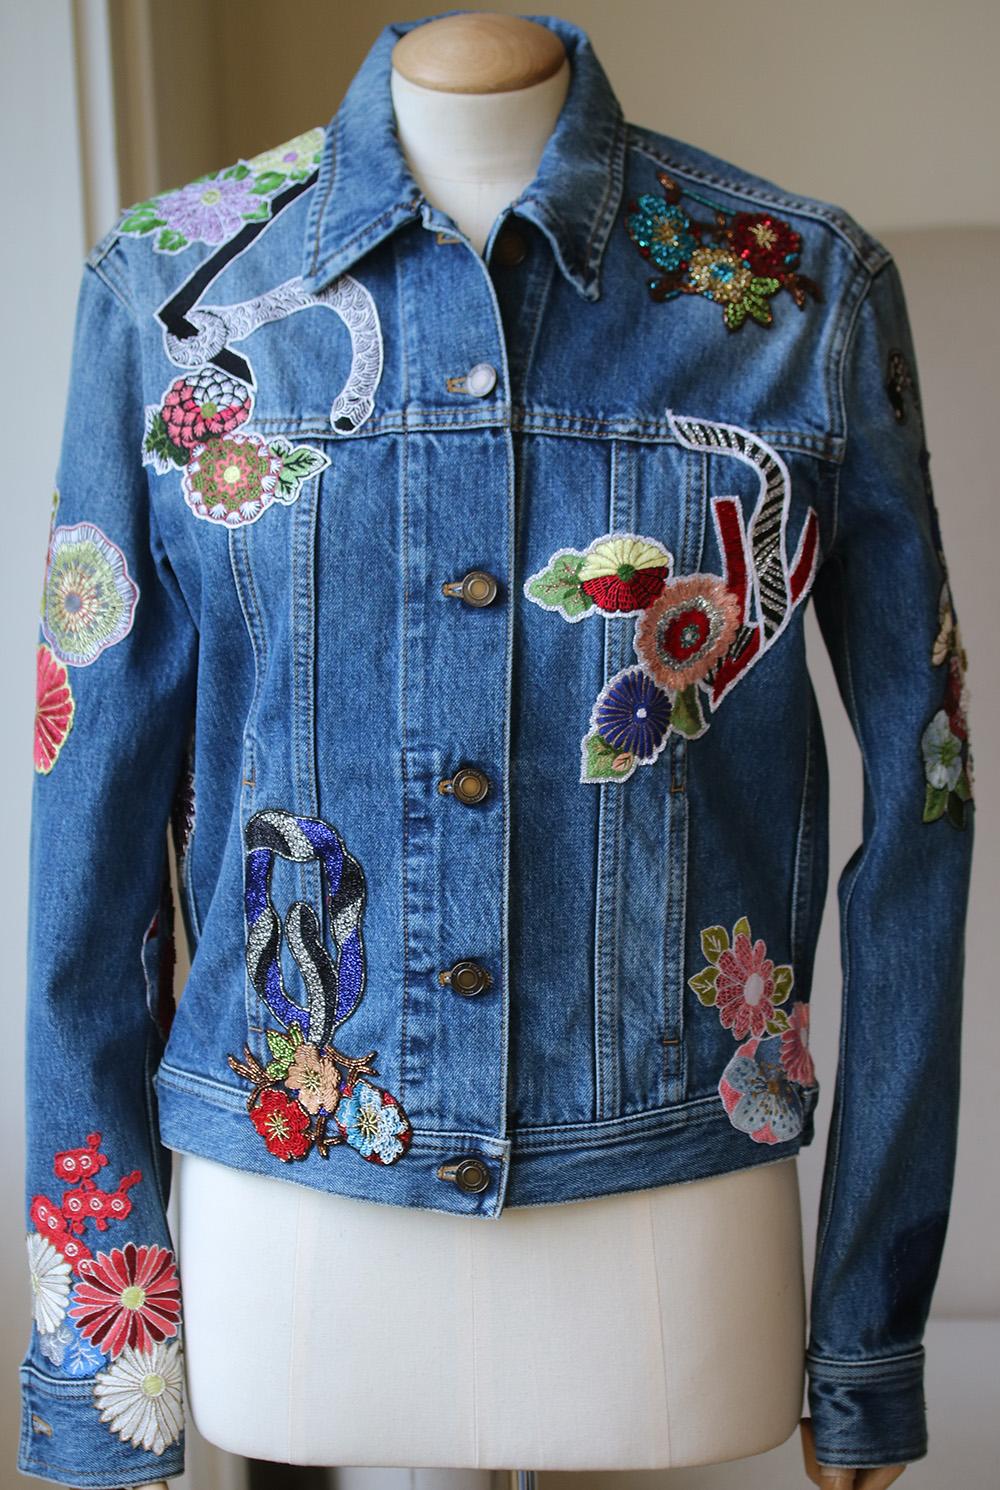 Saint Laurent's stonewashed jacket is cut from denim and finished with whimsical hand-stitched appliqués - a defining theme from the label's collection. Designed in a flattering slim silhouette, it's the perfect way to tap into the house's folkloric